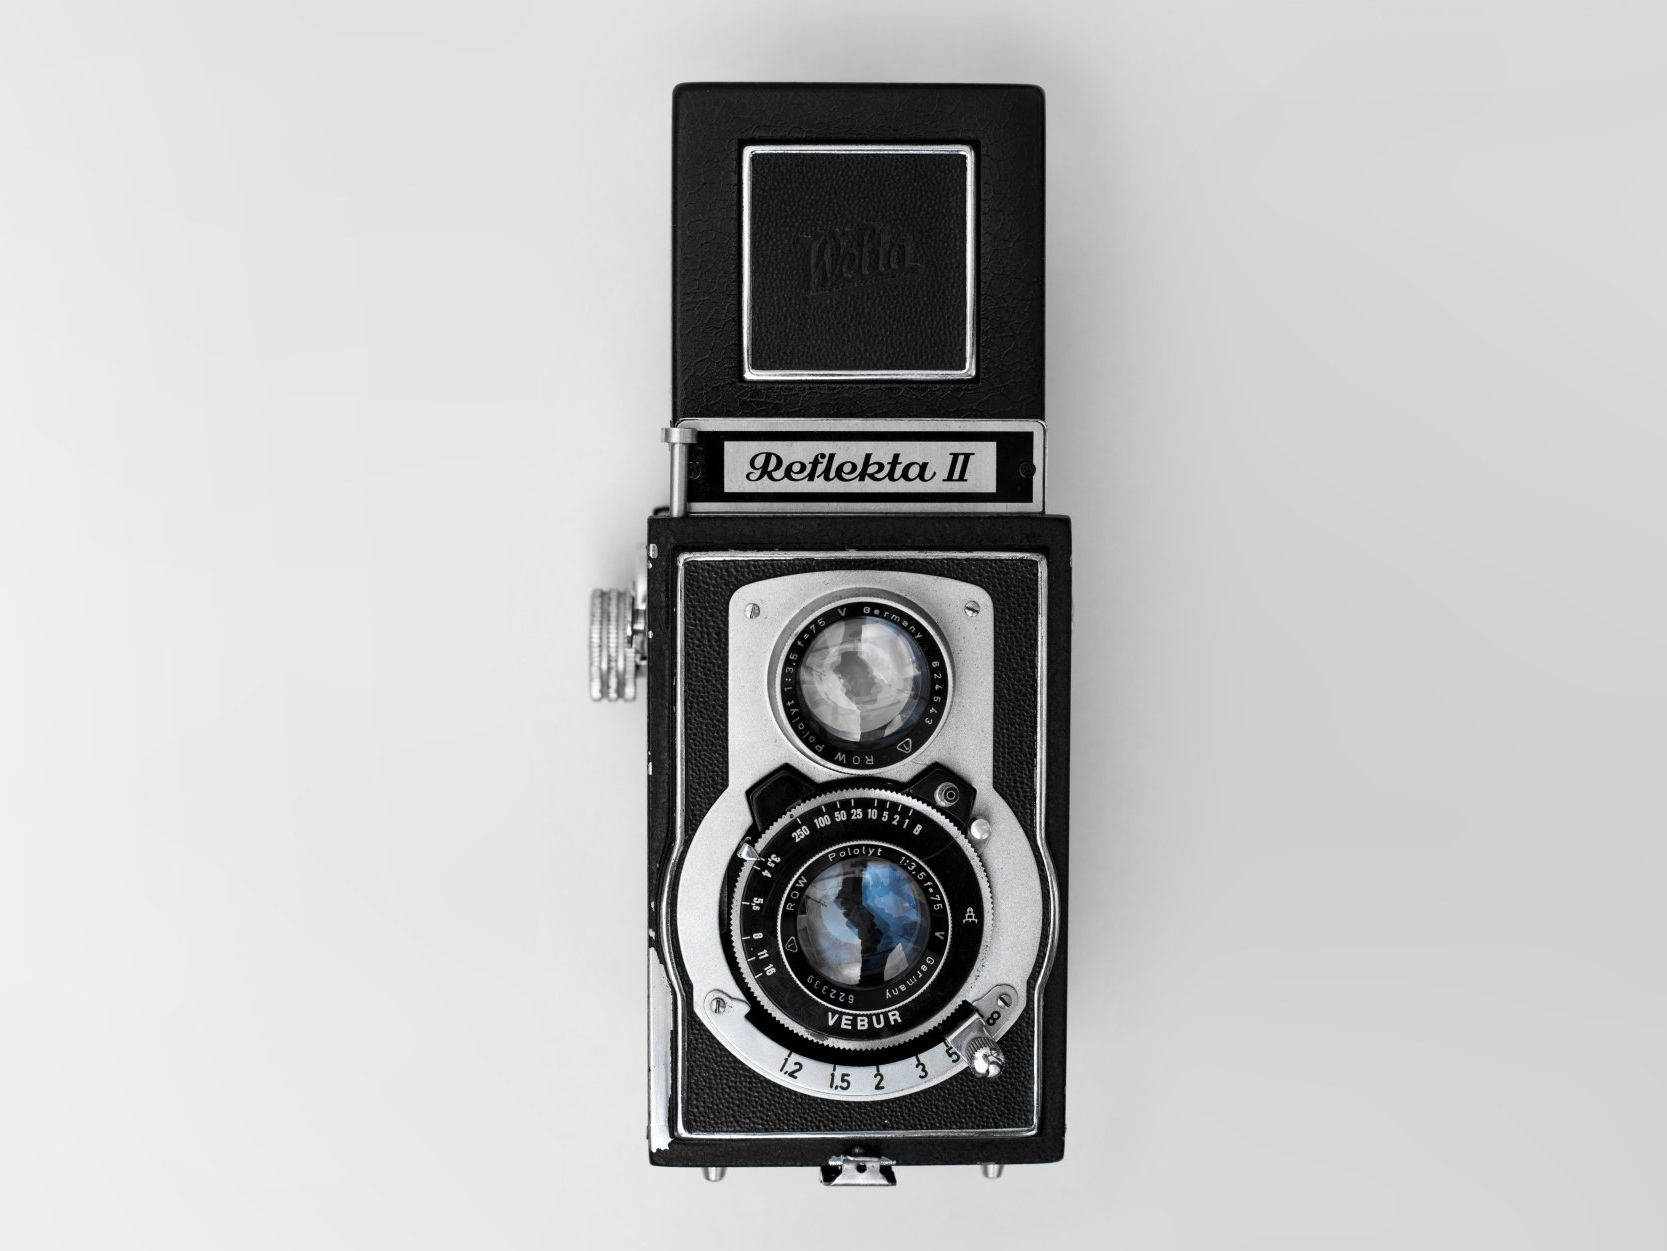 A black and white camera is sitting on a white surface.